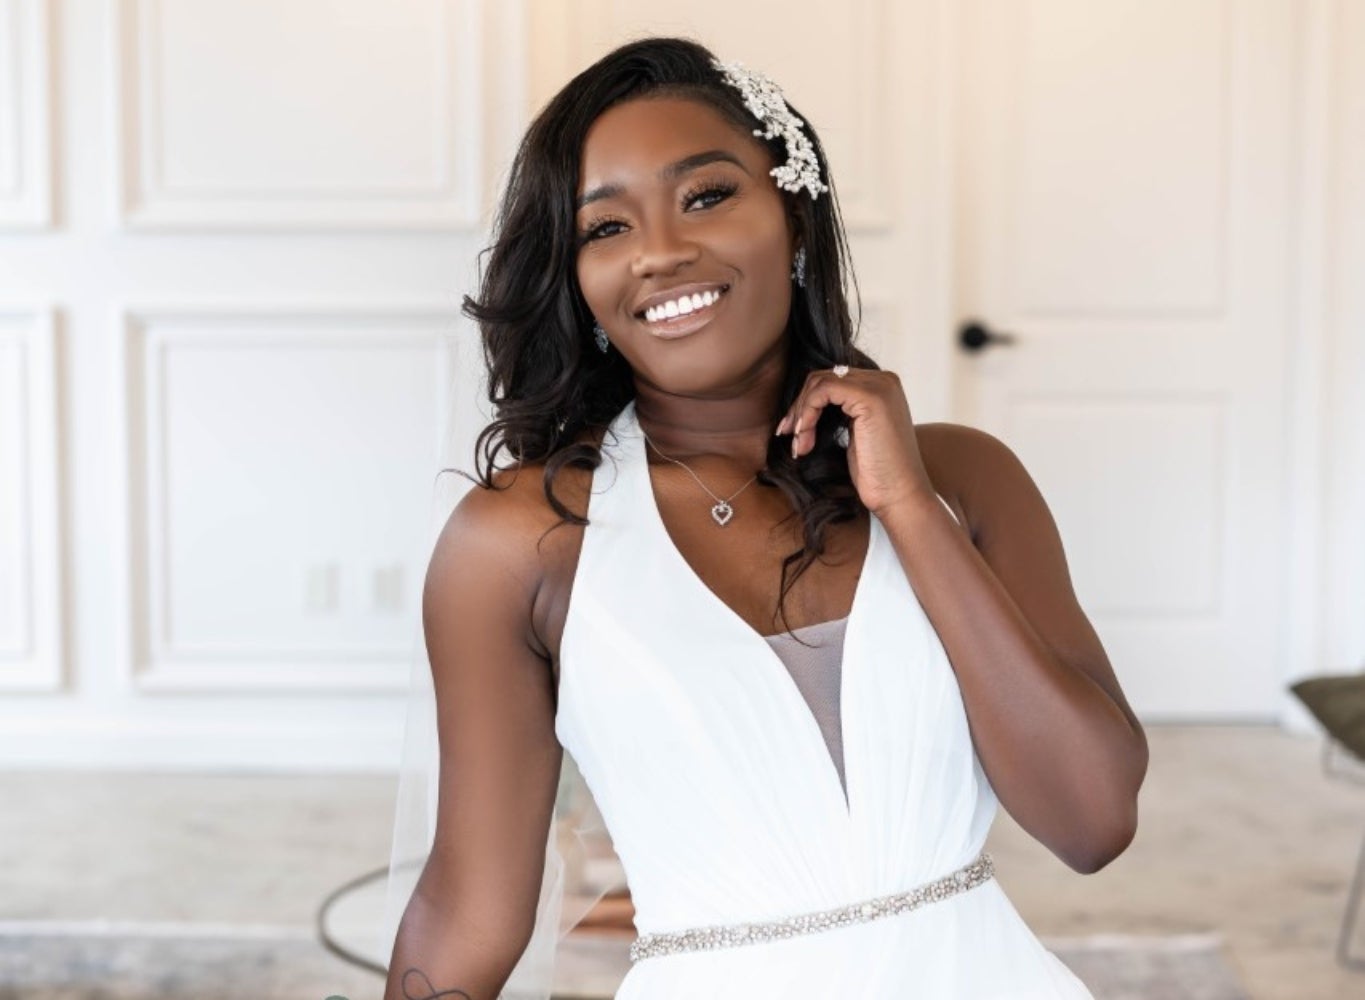 'Married At First Sight' Alum Paige Banks On Healing, Helping Other Women And Why She Won't Talk About Her Ex